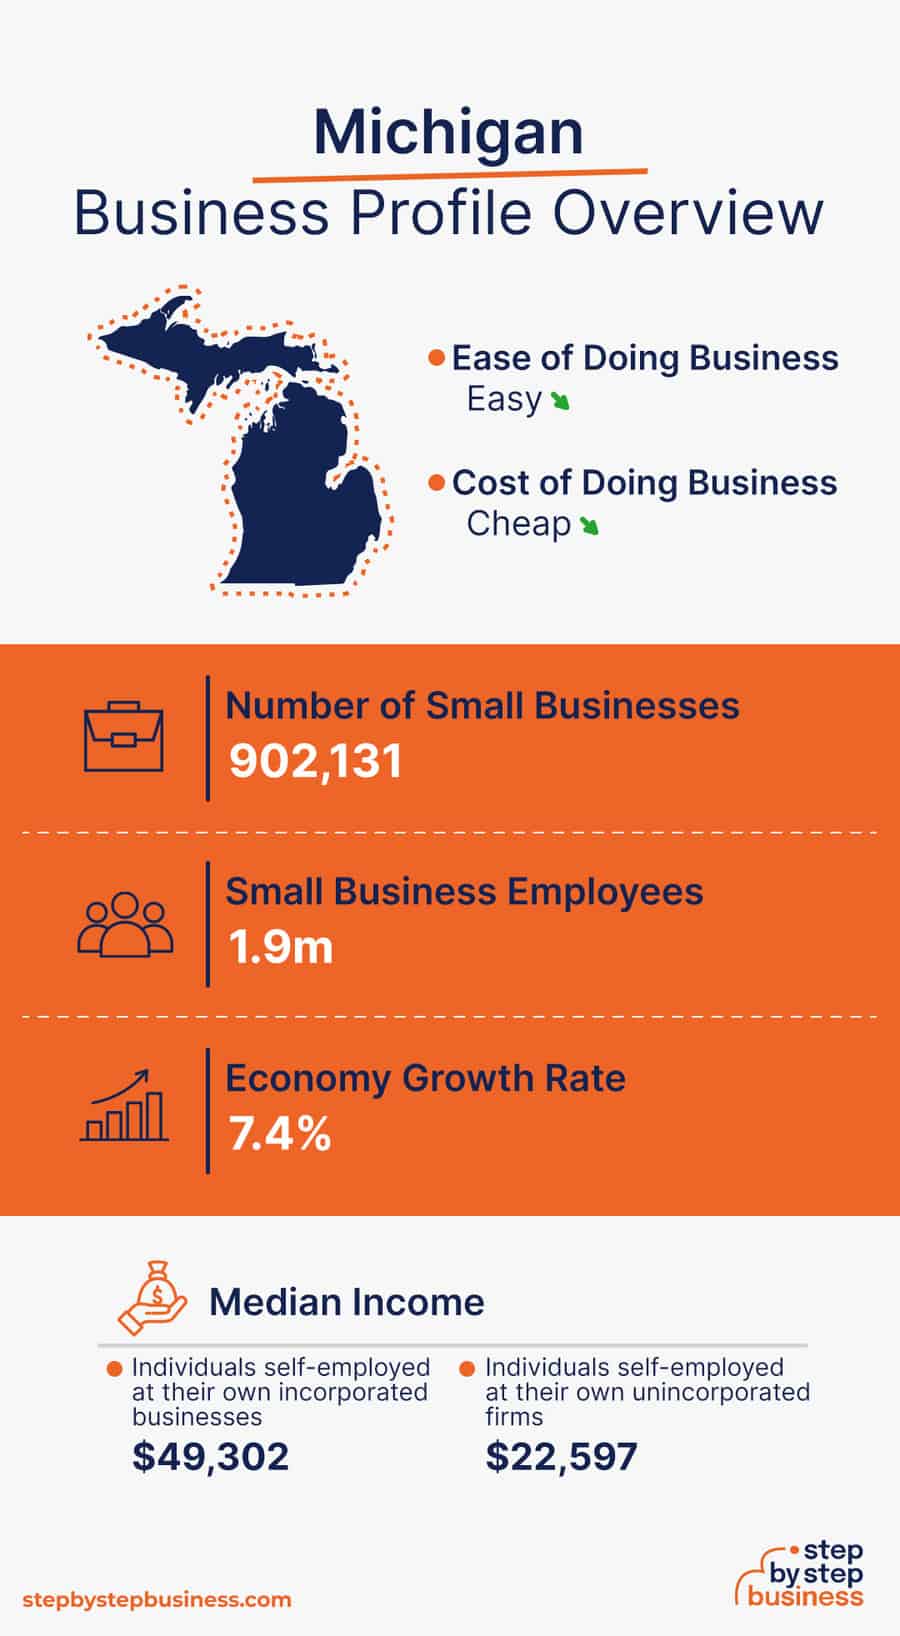 Michigan Business Profile Overview